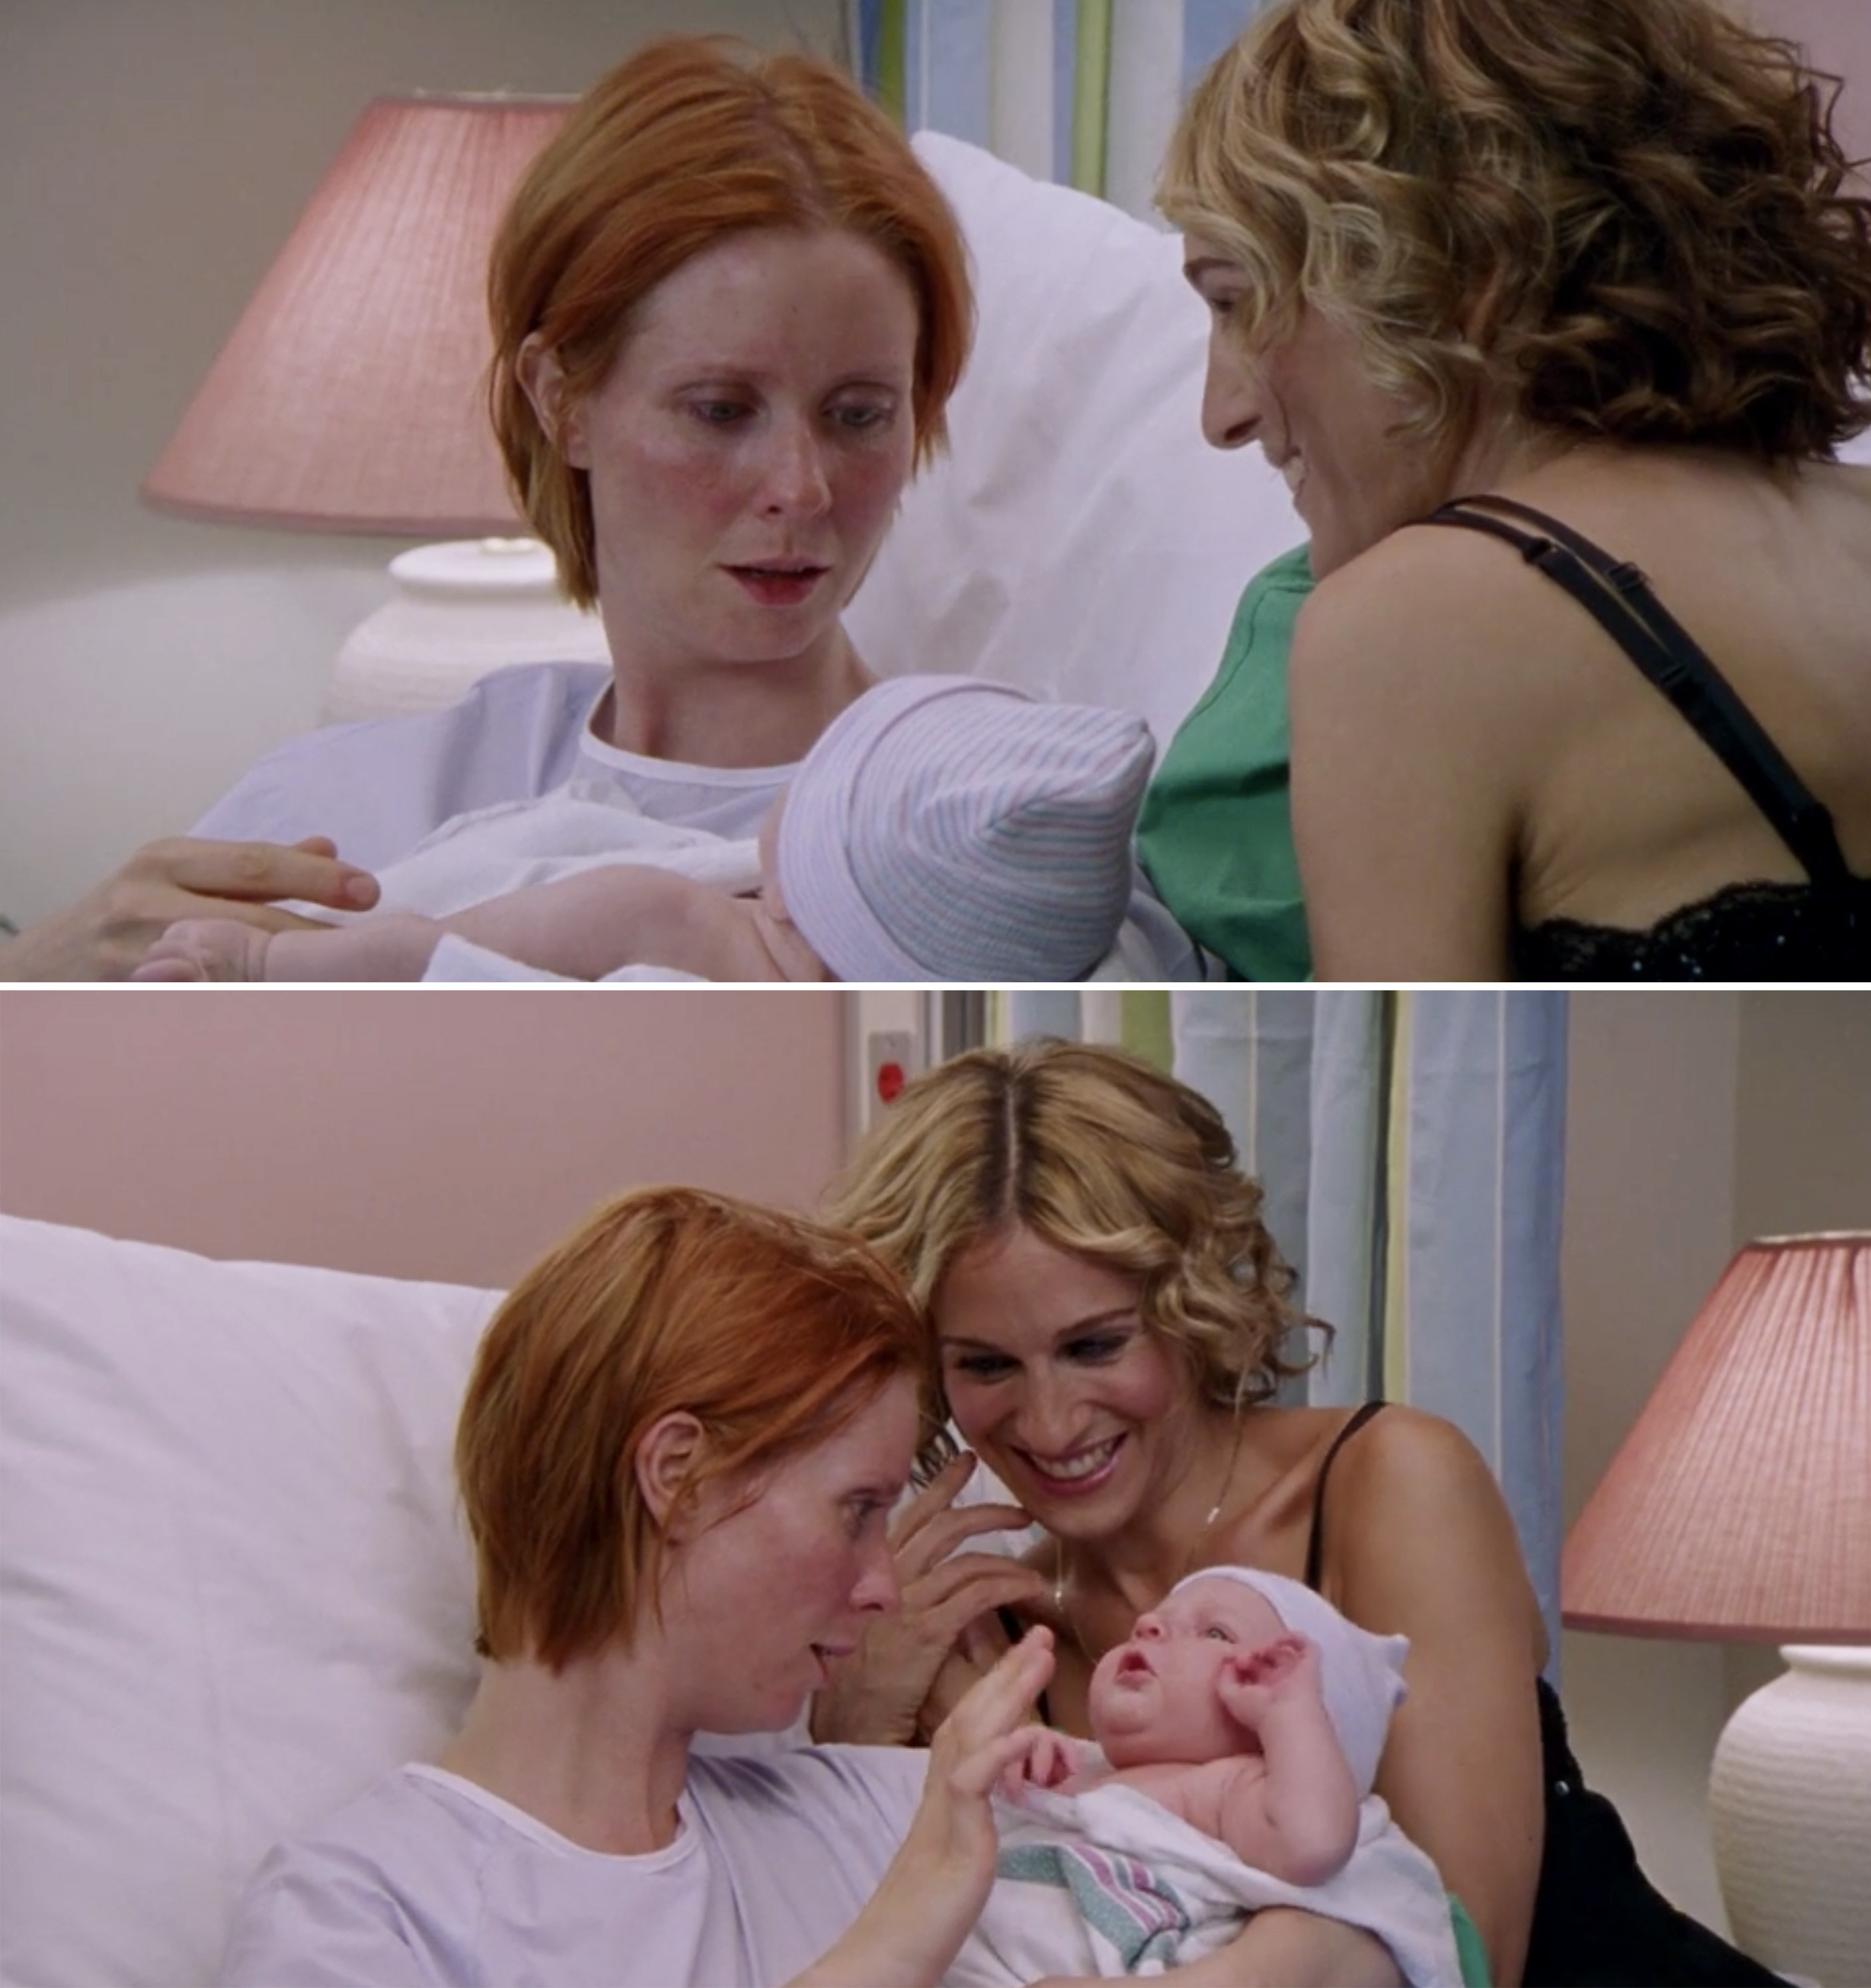 Miranda and Carrie smiling while Miranda holds her son in the hospital